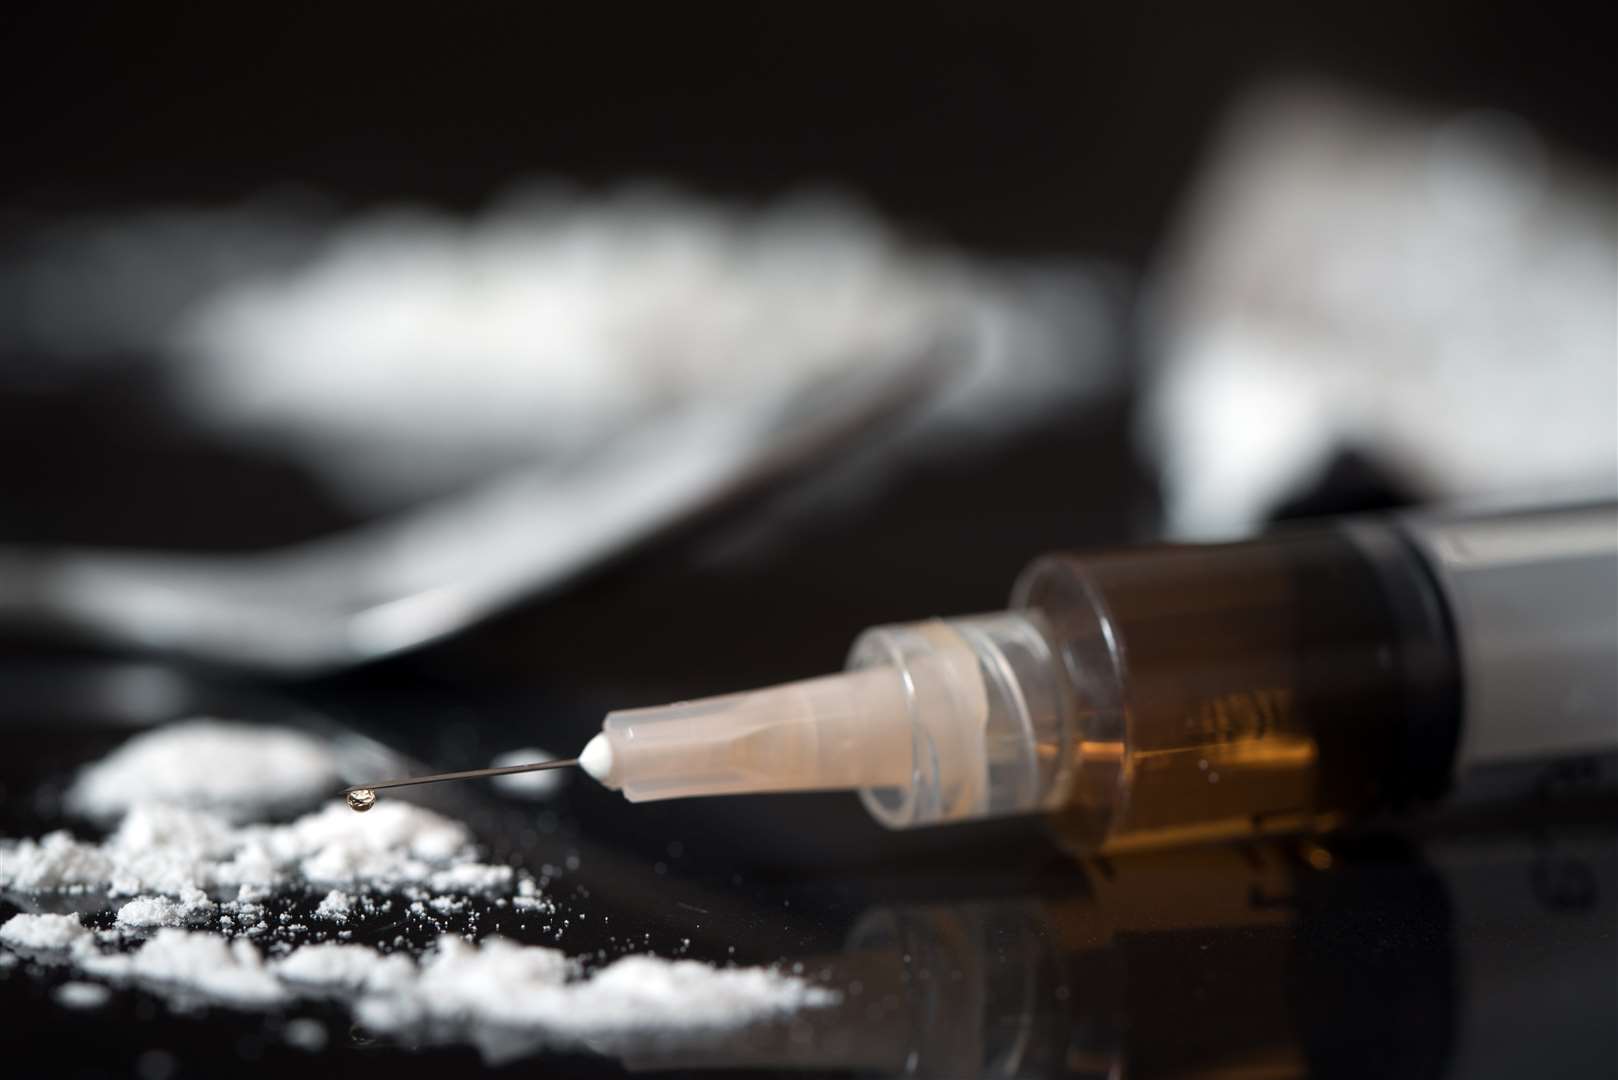 Drugs such as heroin could be taken at the centres Picture: Kenishirotie/iStock